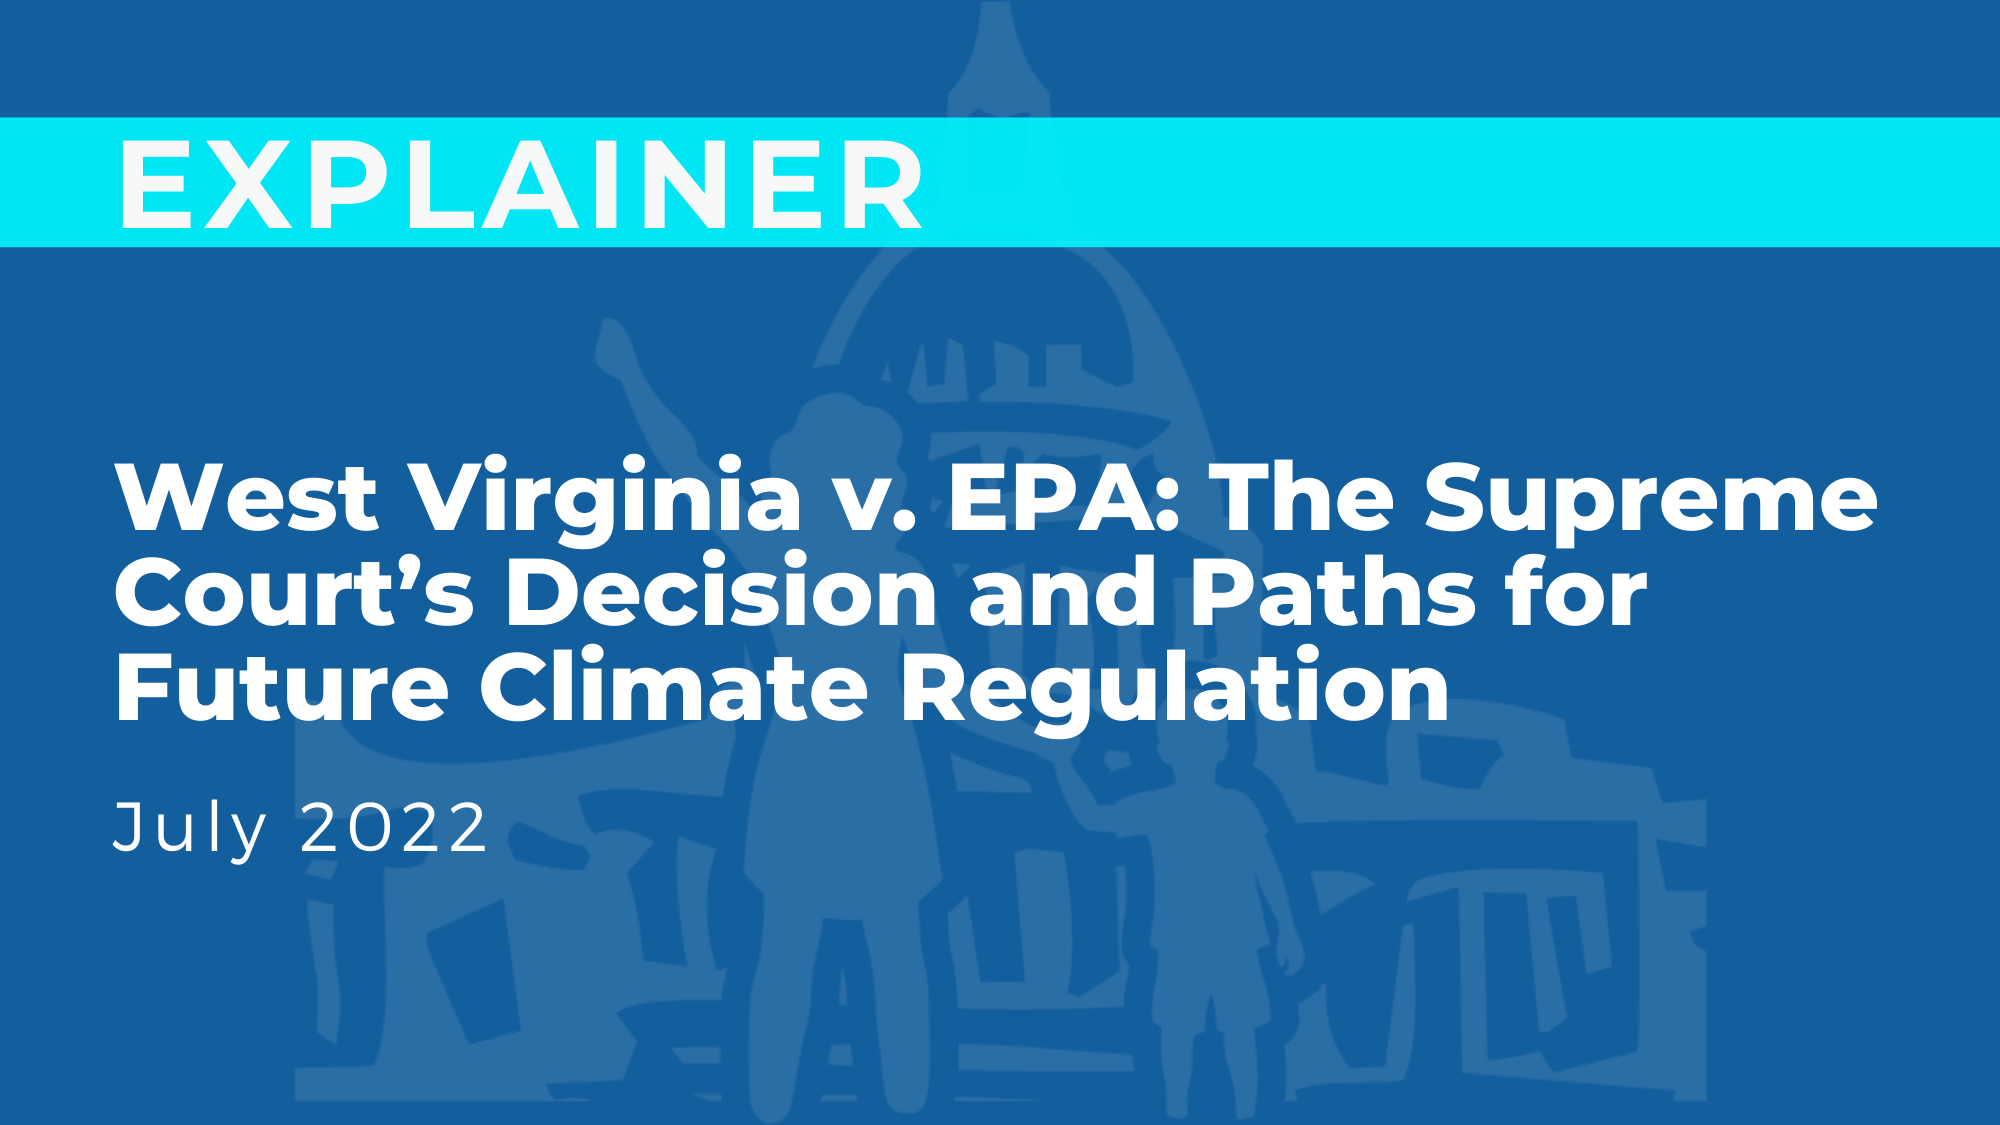 West Virginia v. EPA: The Supreme Court's Decision and Paths of Future Climate Regulation